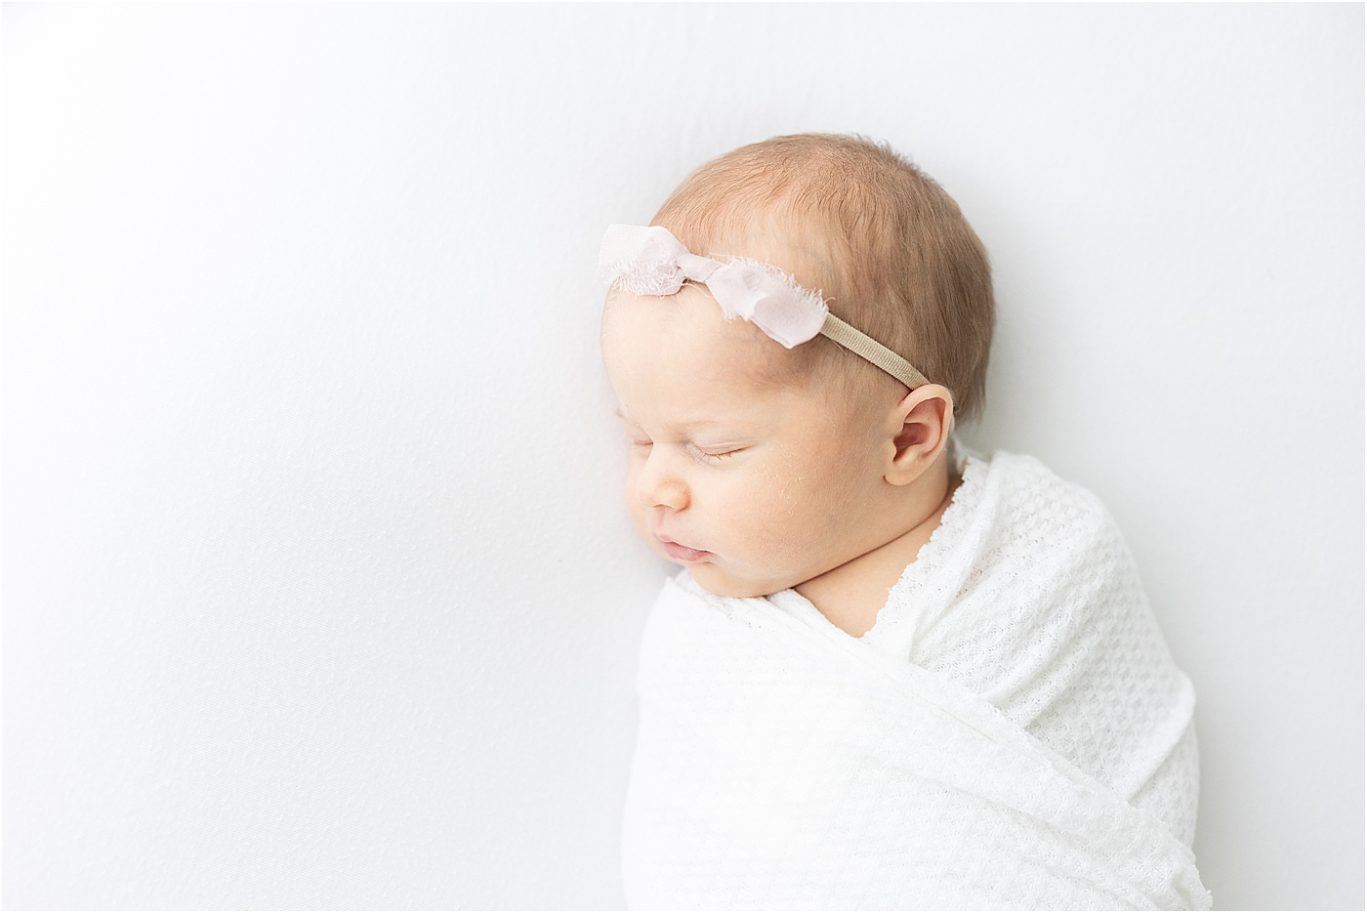 Newborn session with baby girl in studio in Fishers. Photo by Lindsay Konopa Photography.